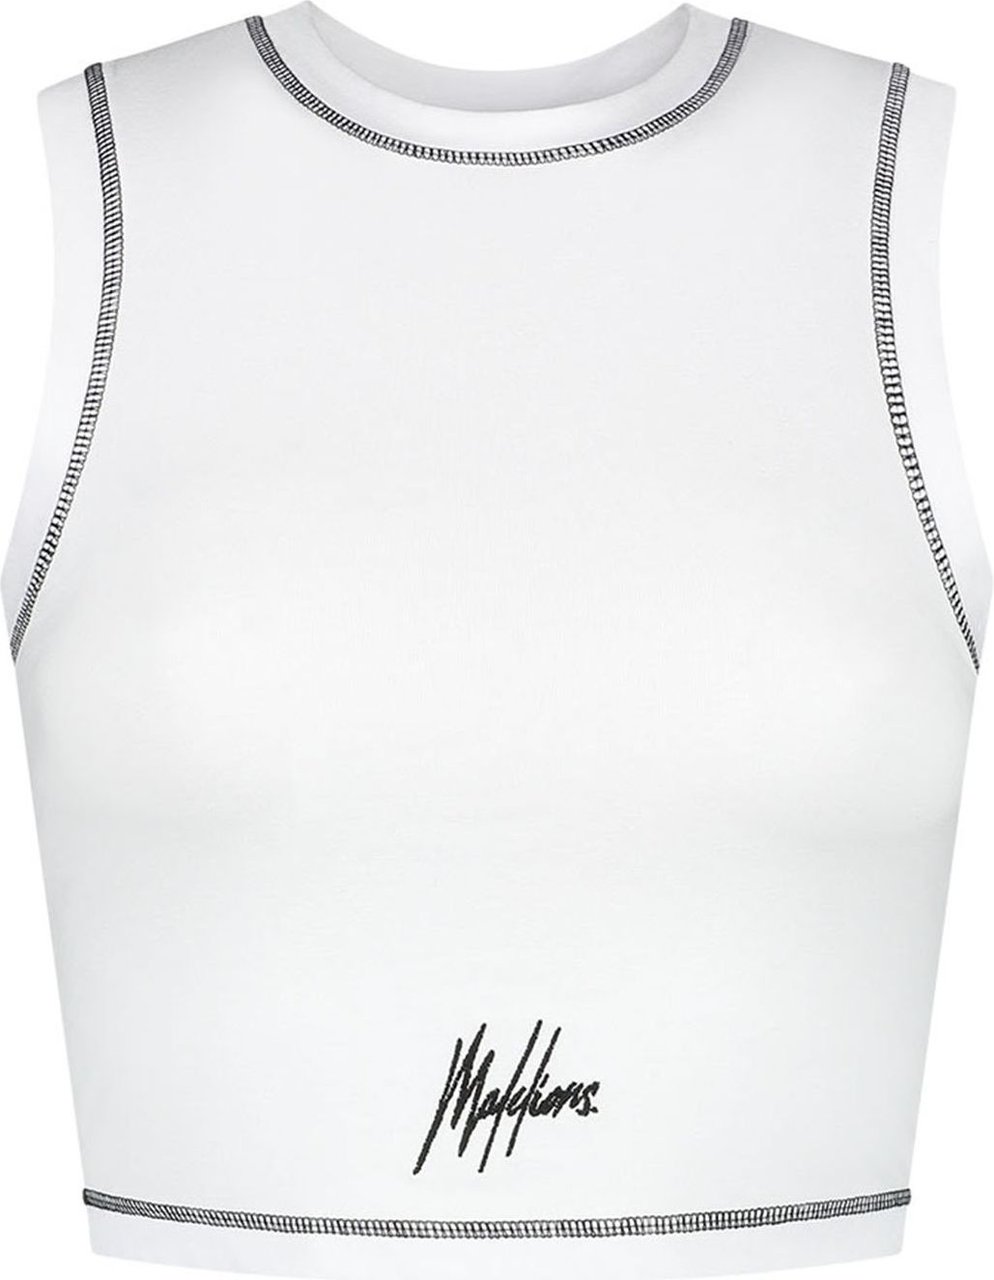 Malelions Crop Top - White Wit